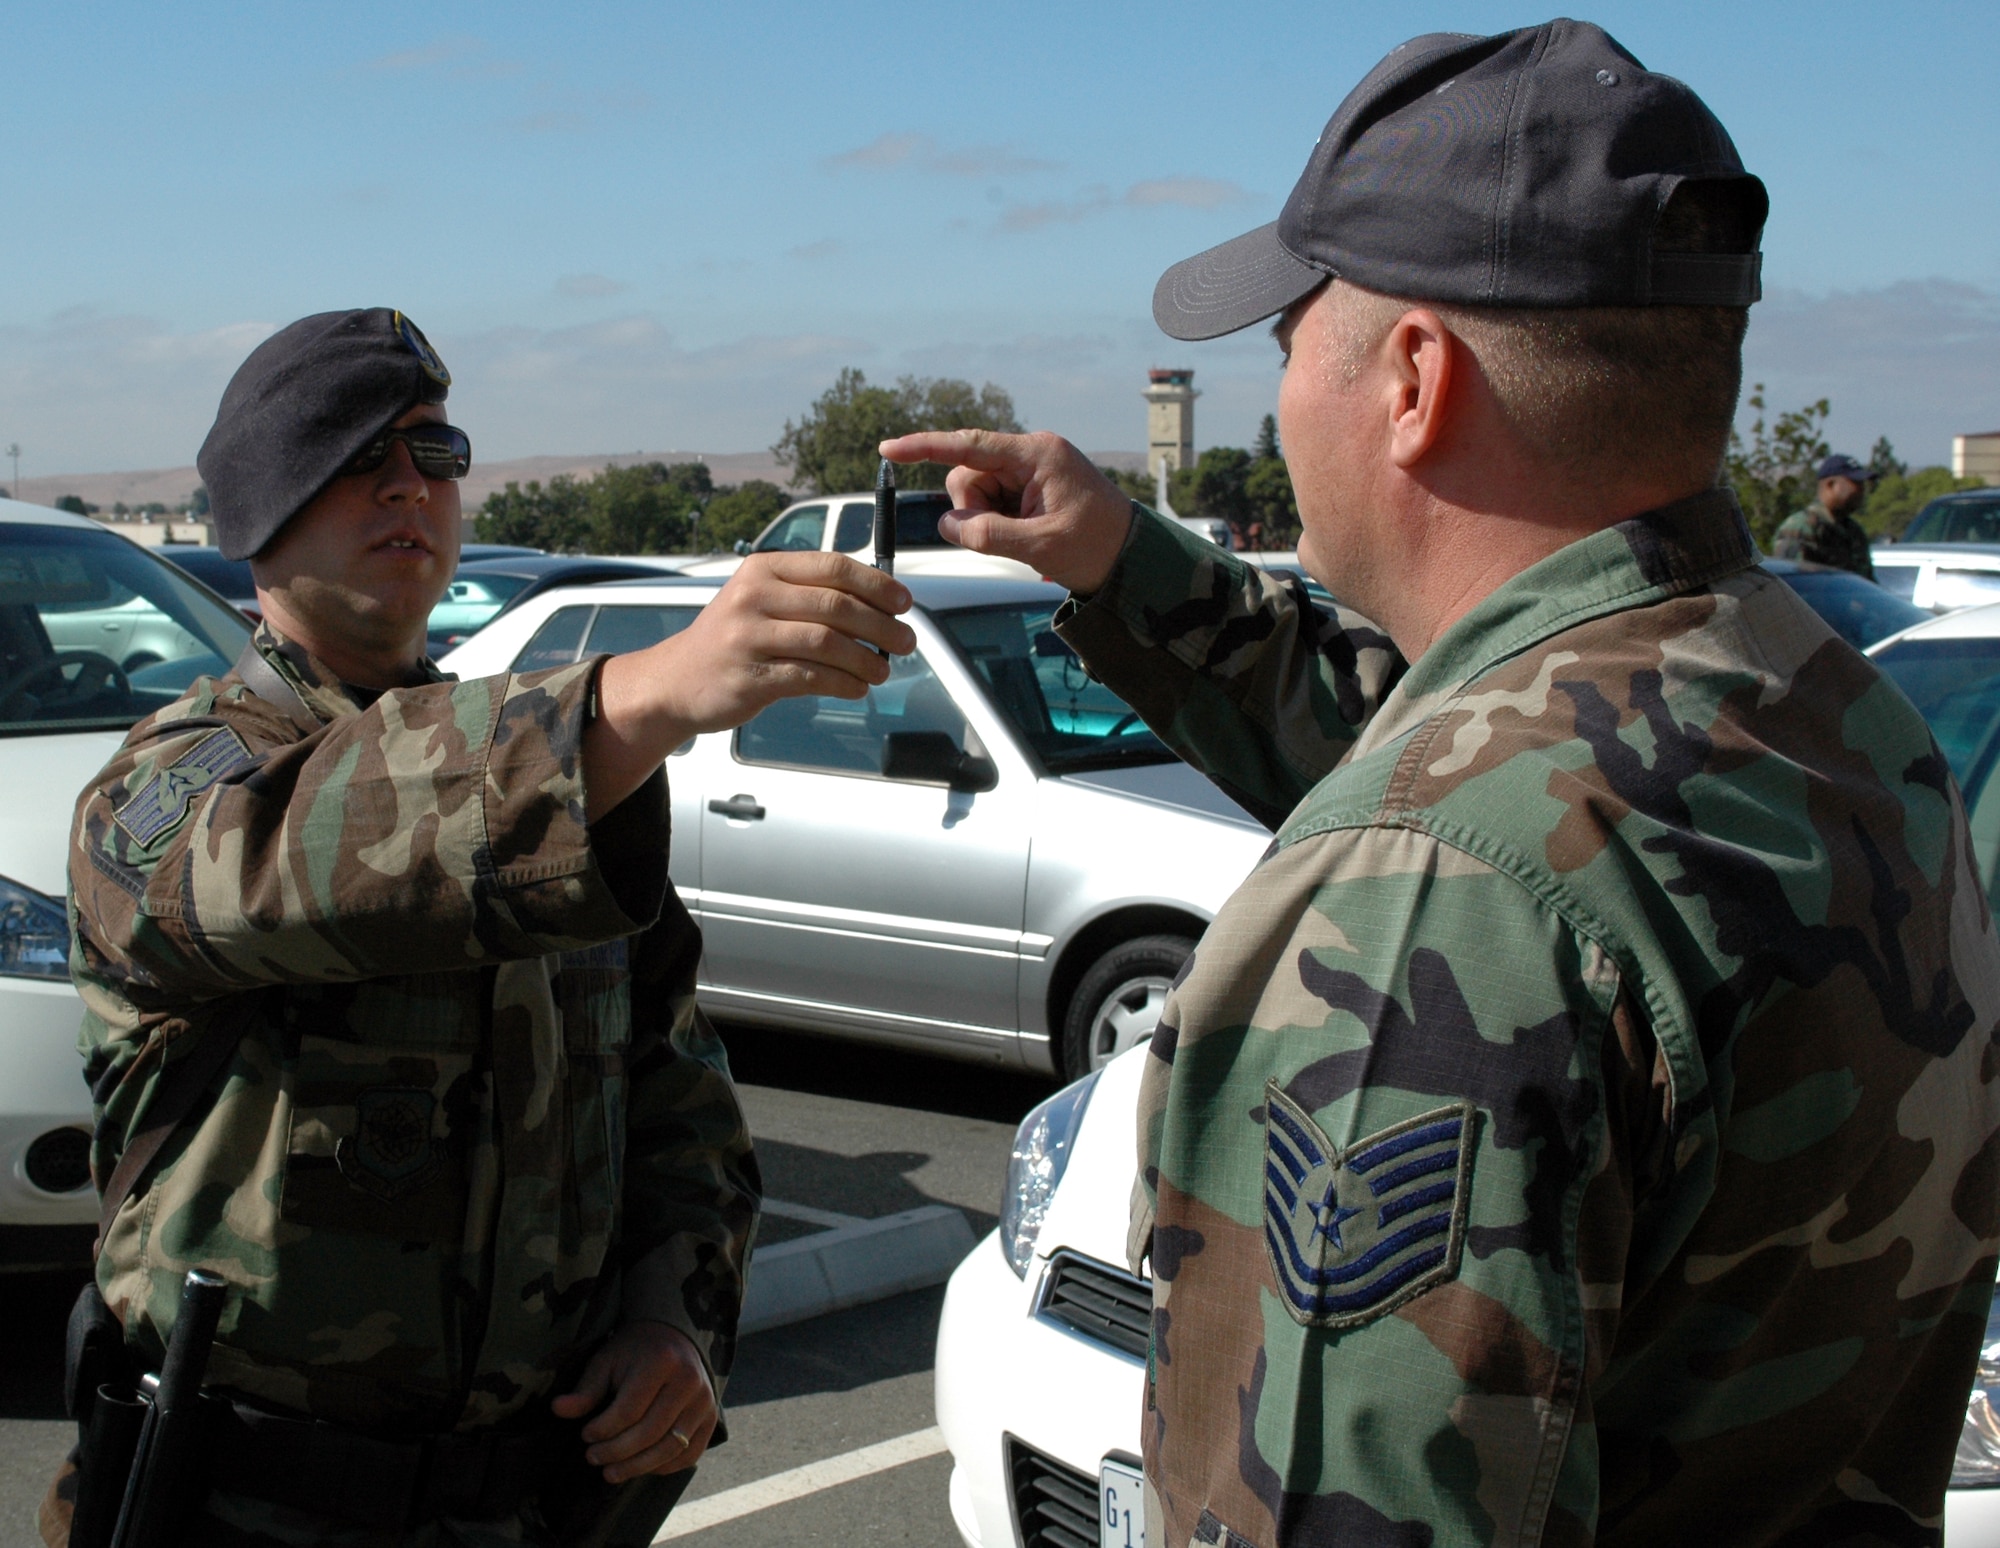 Staff Sgt. Chris Crankshaw, 60th Security Forces Squadron, demonstrates a field sobriety test with an Airman. (U.S. Air Force photo/Airman 1st Class Kristen Rohrer)